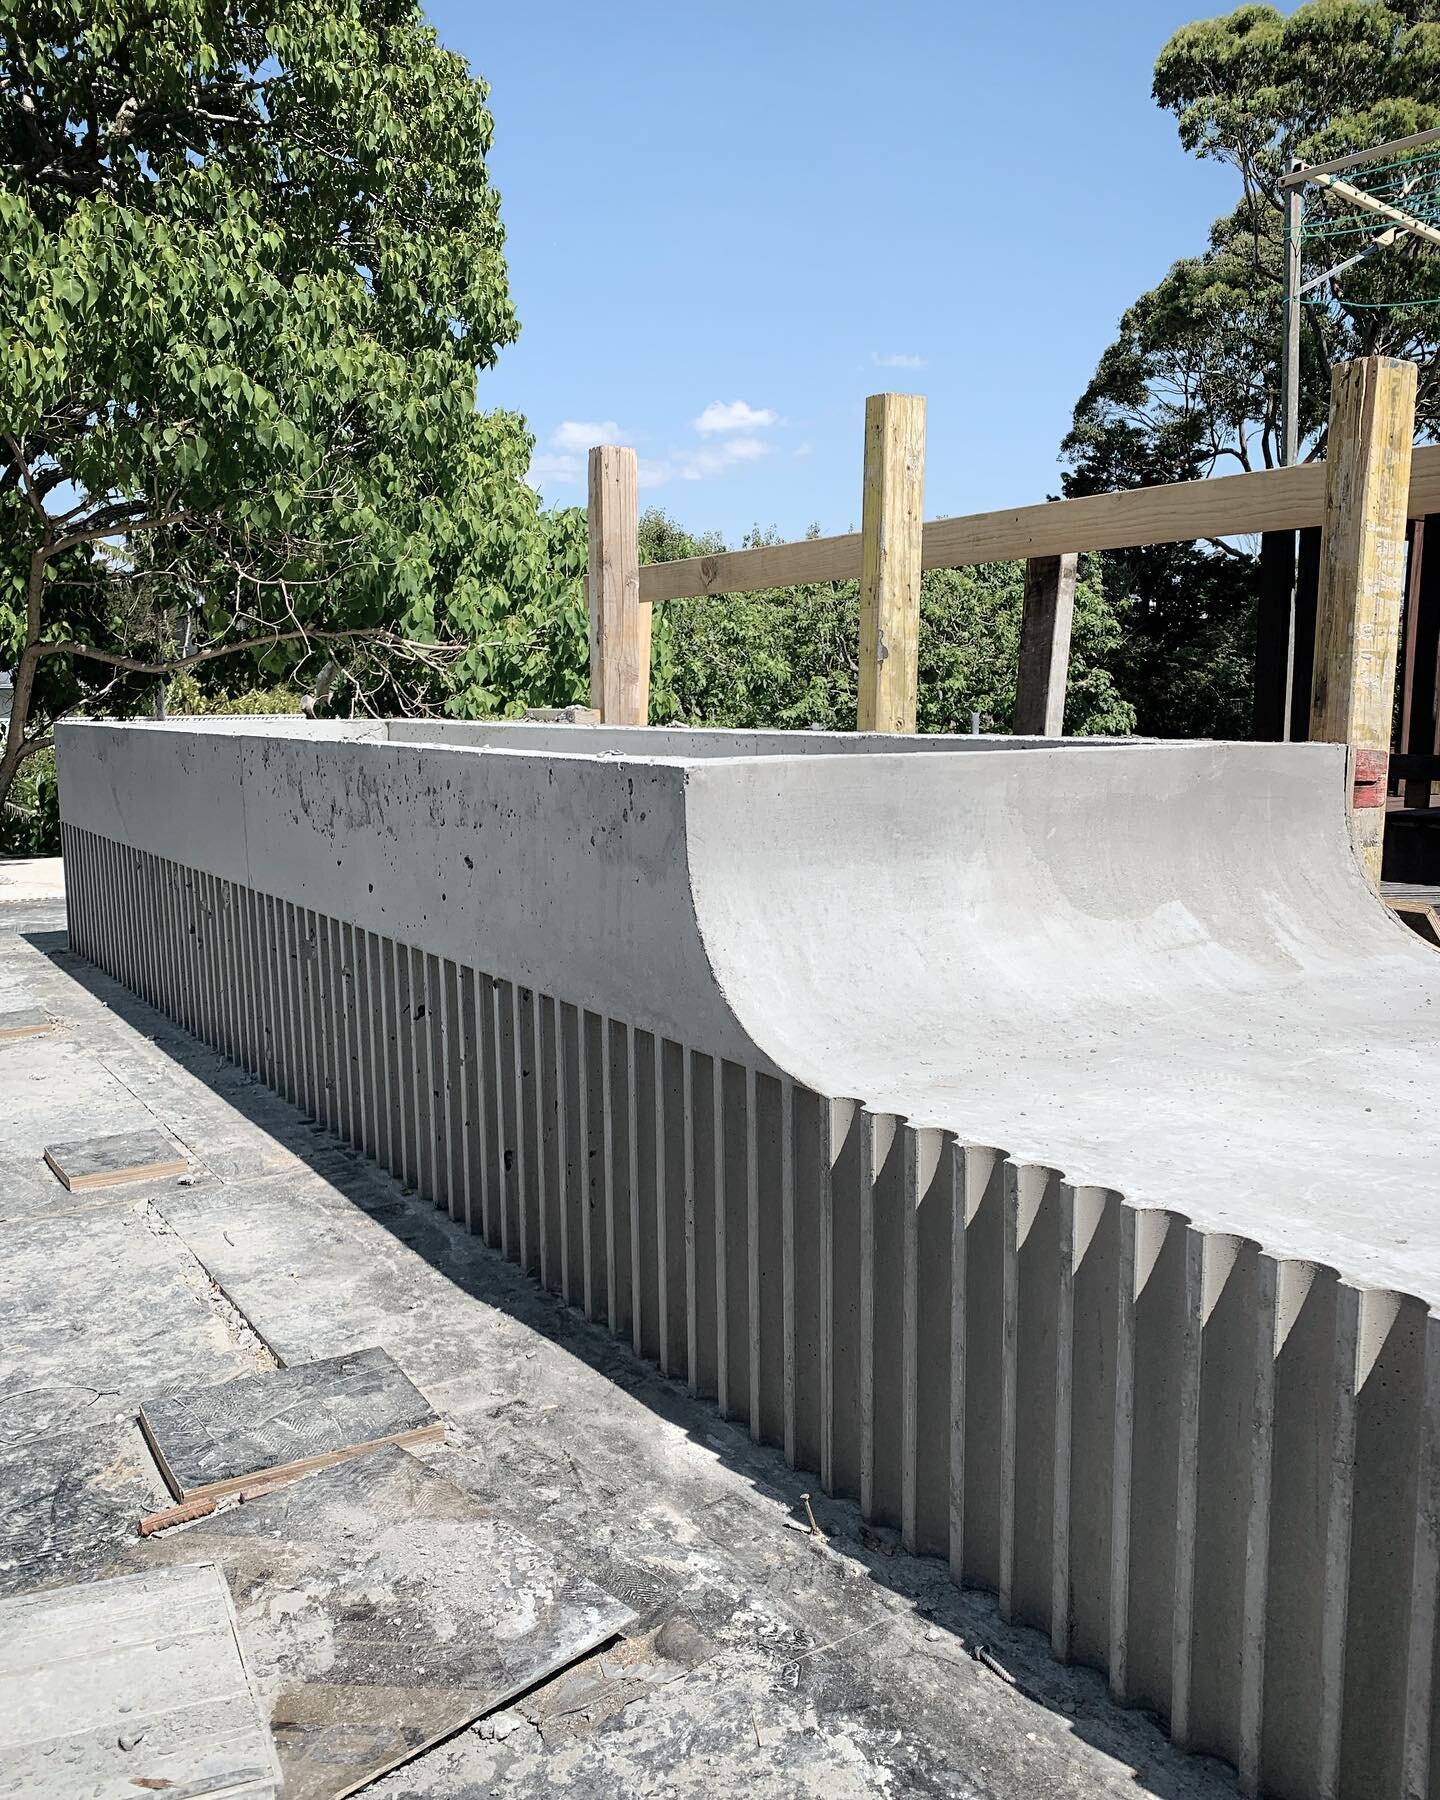 Some great concrete work at our South Cronulla project by @buildbydesign.bbd @stavvy_cav 👏&hellip; just add planting 🌱 
#concrete #offformconcrete #fluting #planter #awnings #architecture #sydney #australianarchitecture #local #cronulla